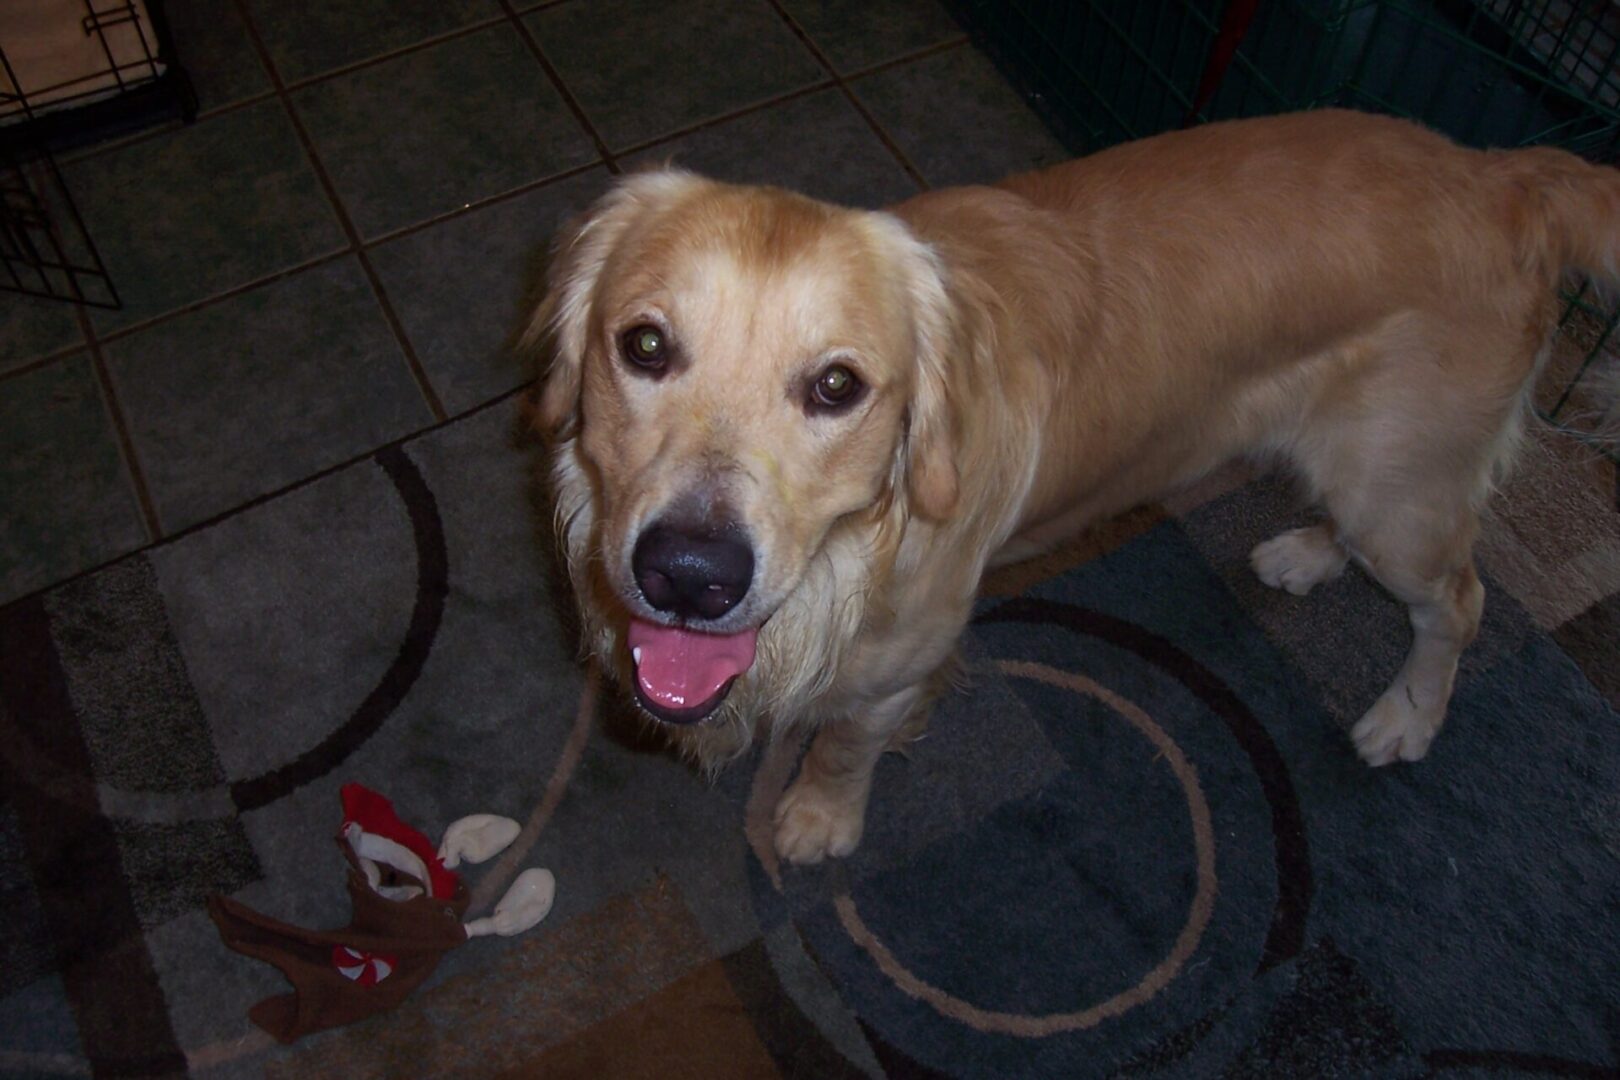 A golden retriever standing on a patterned rug with a toy.